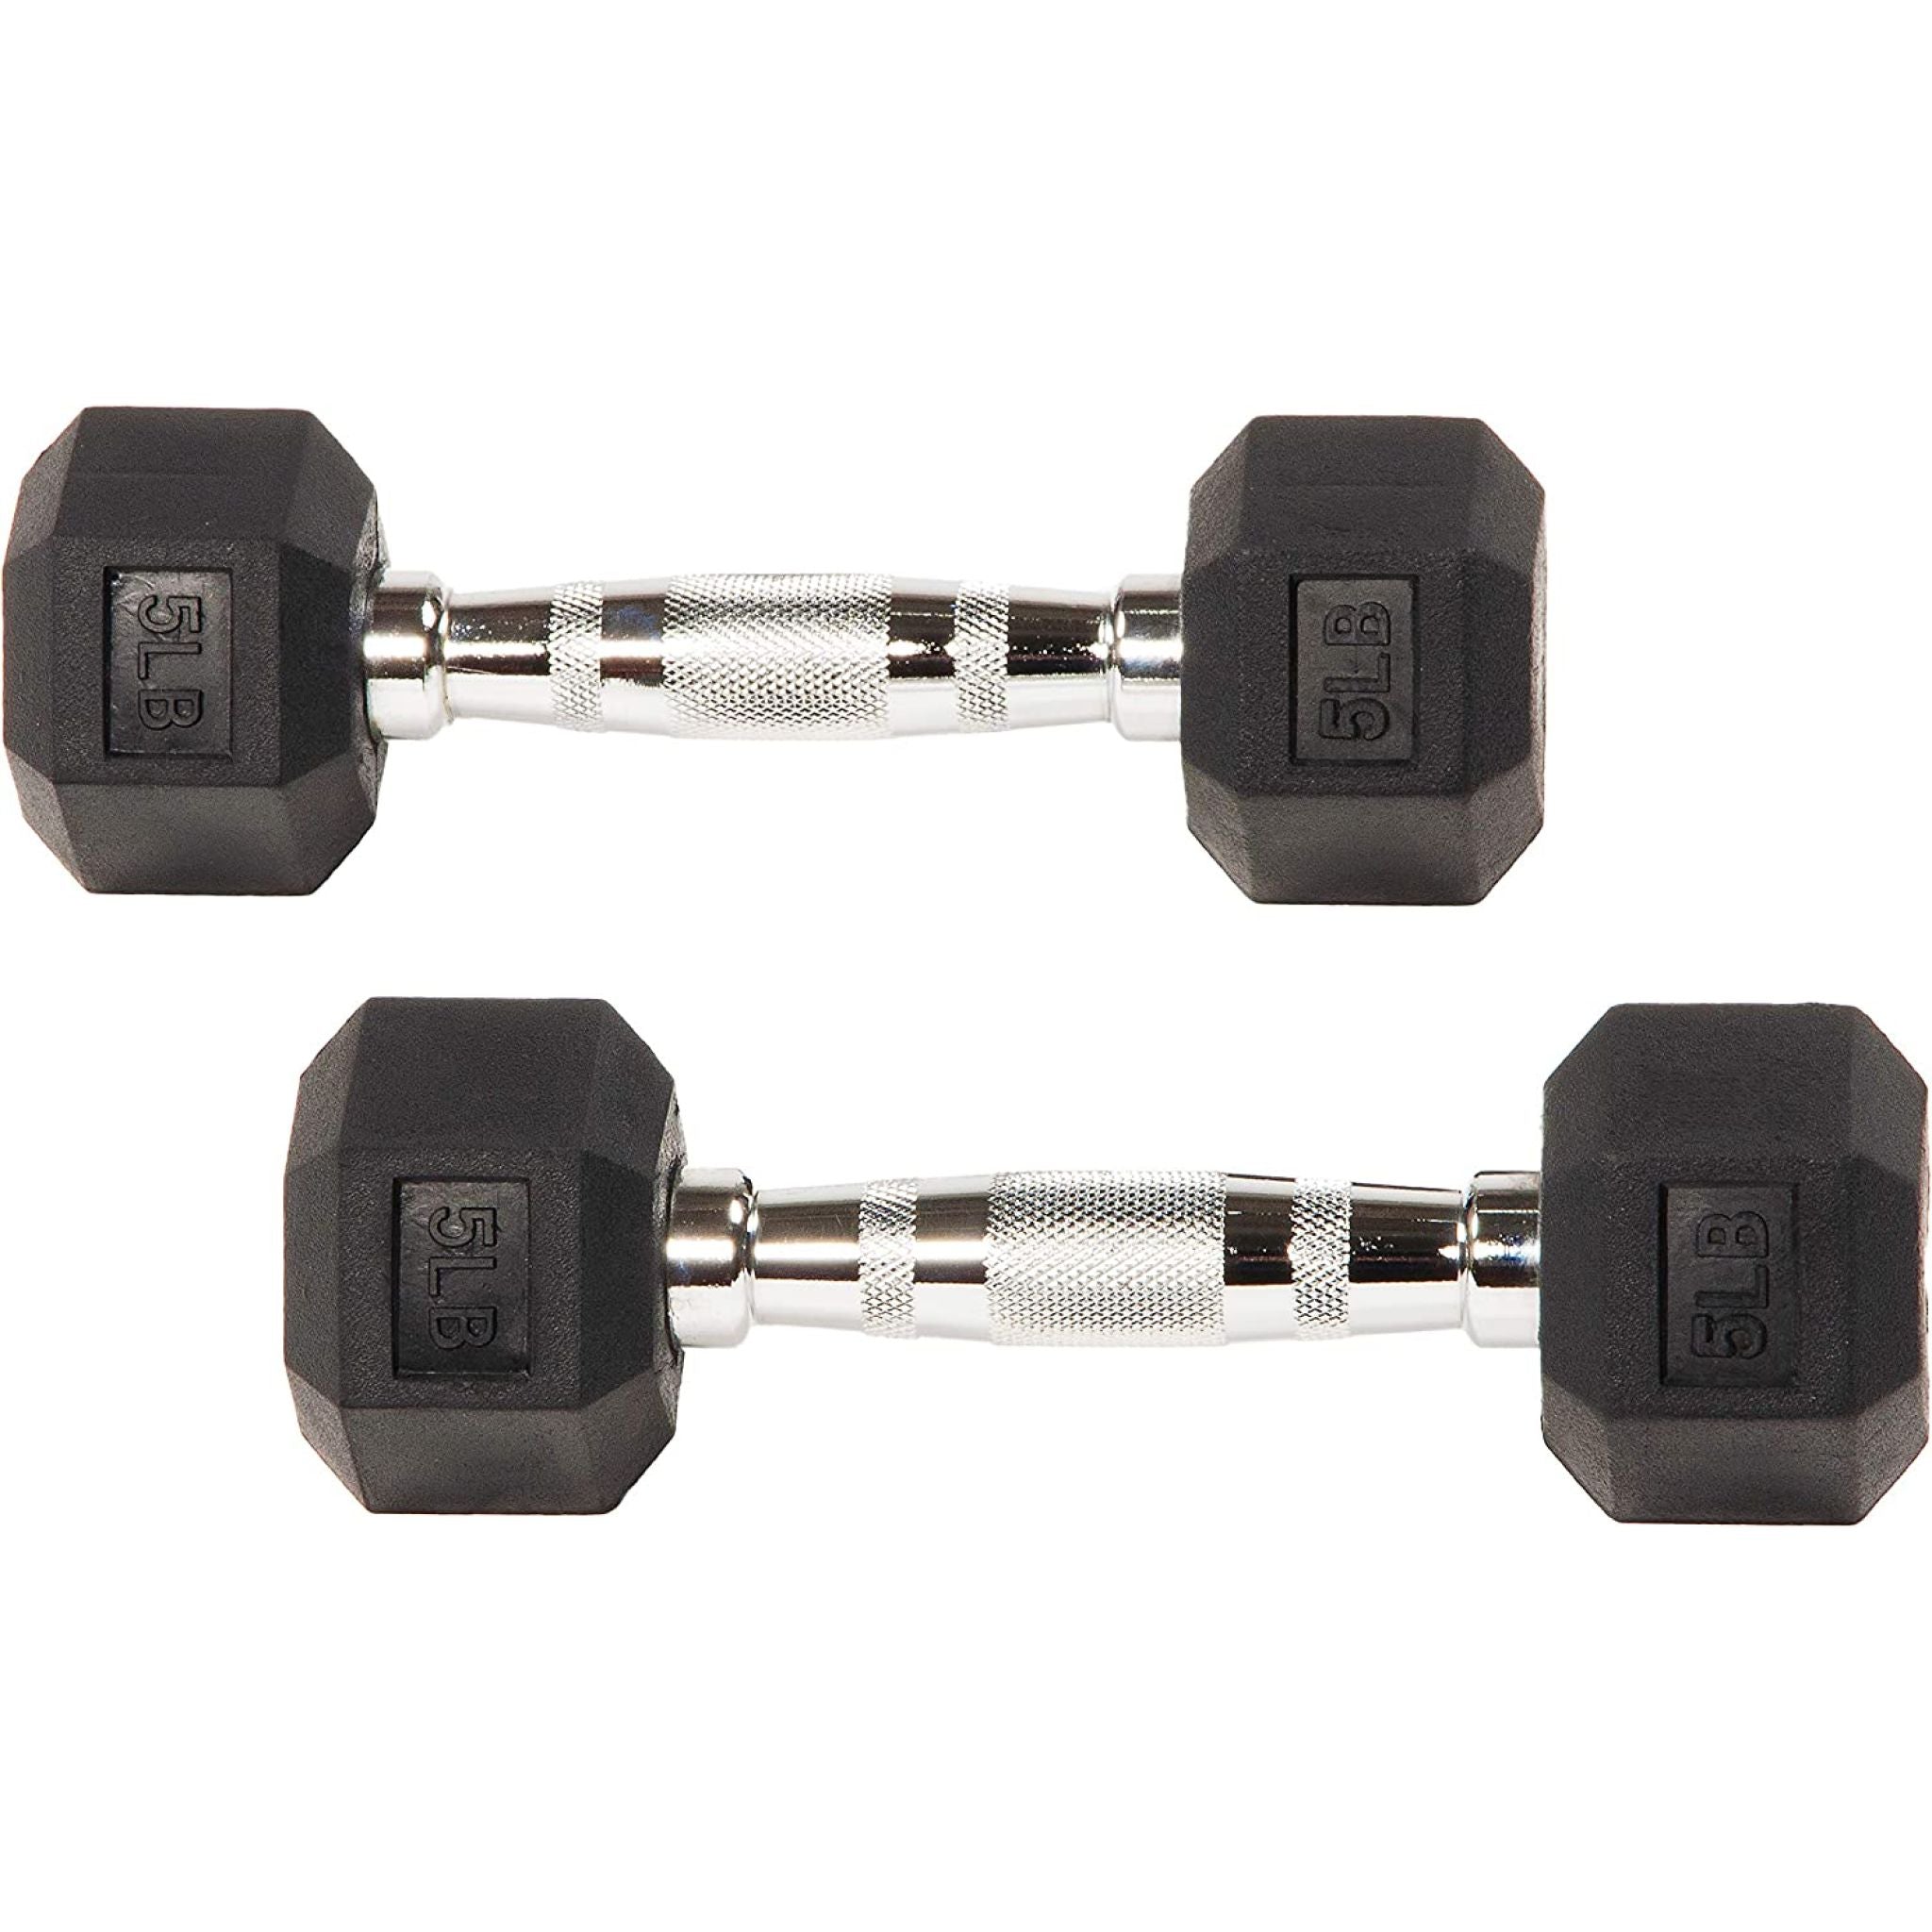 5Lb rubber hex dumbbells pair at Express Gym Supply